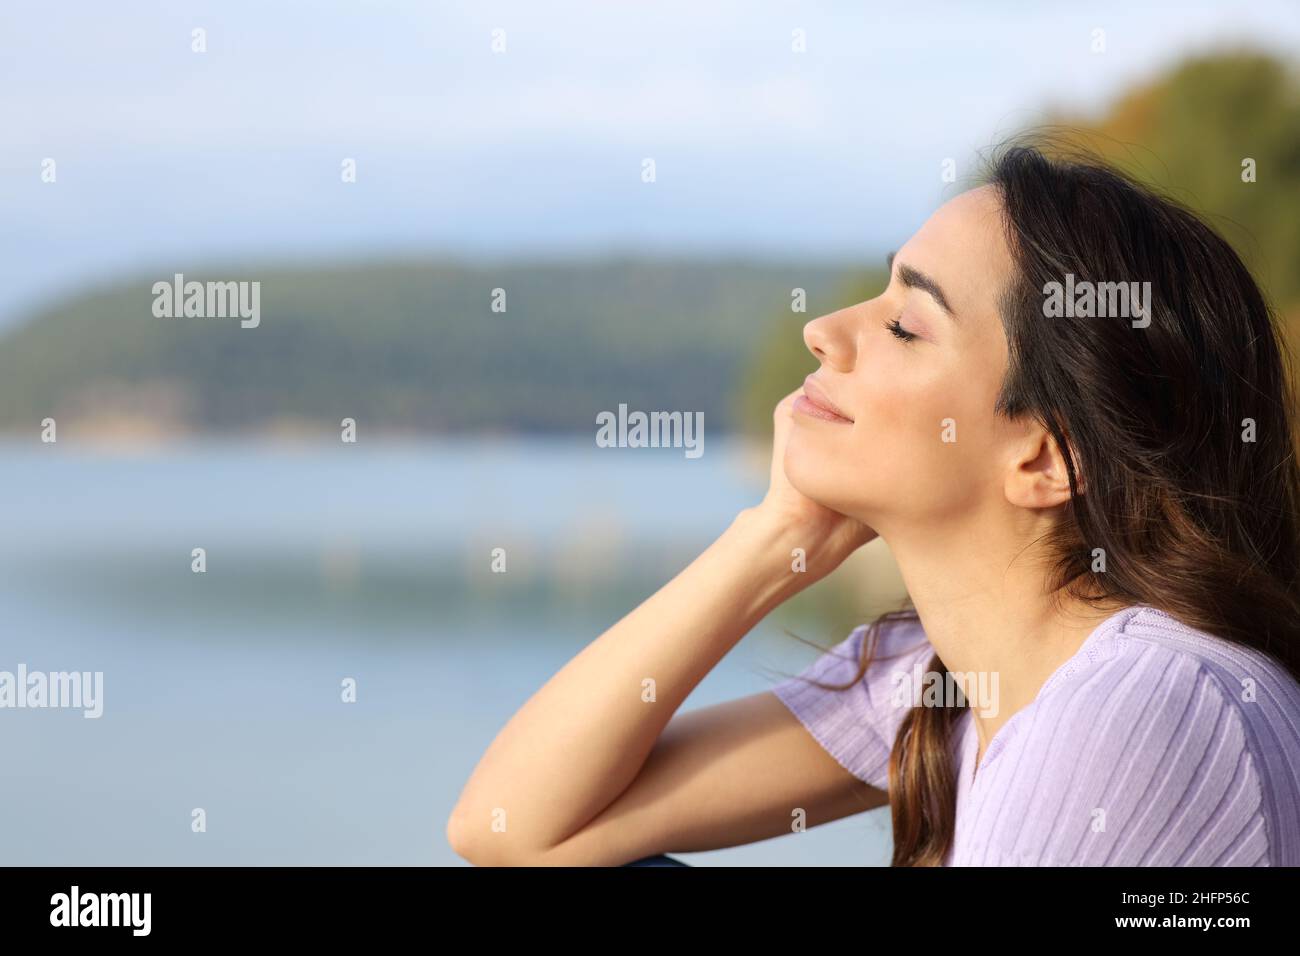 Profile of a happy woman relaxing in a lake Stock Photo